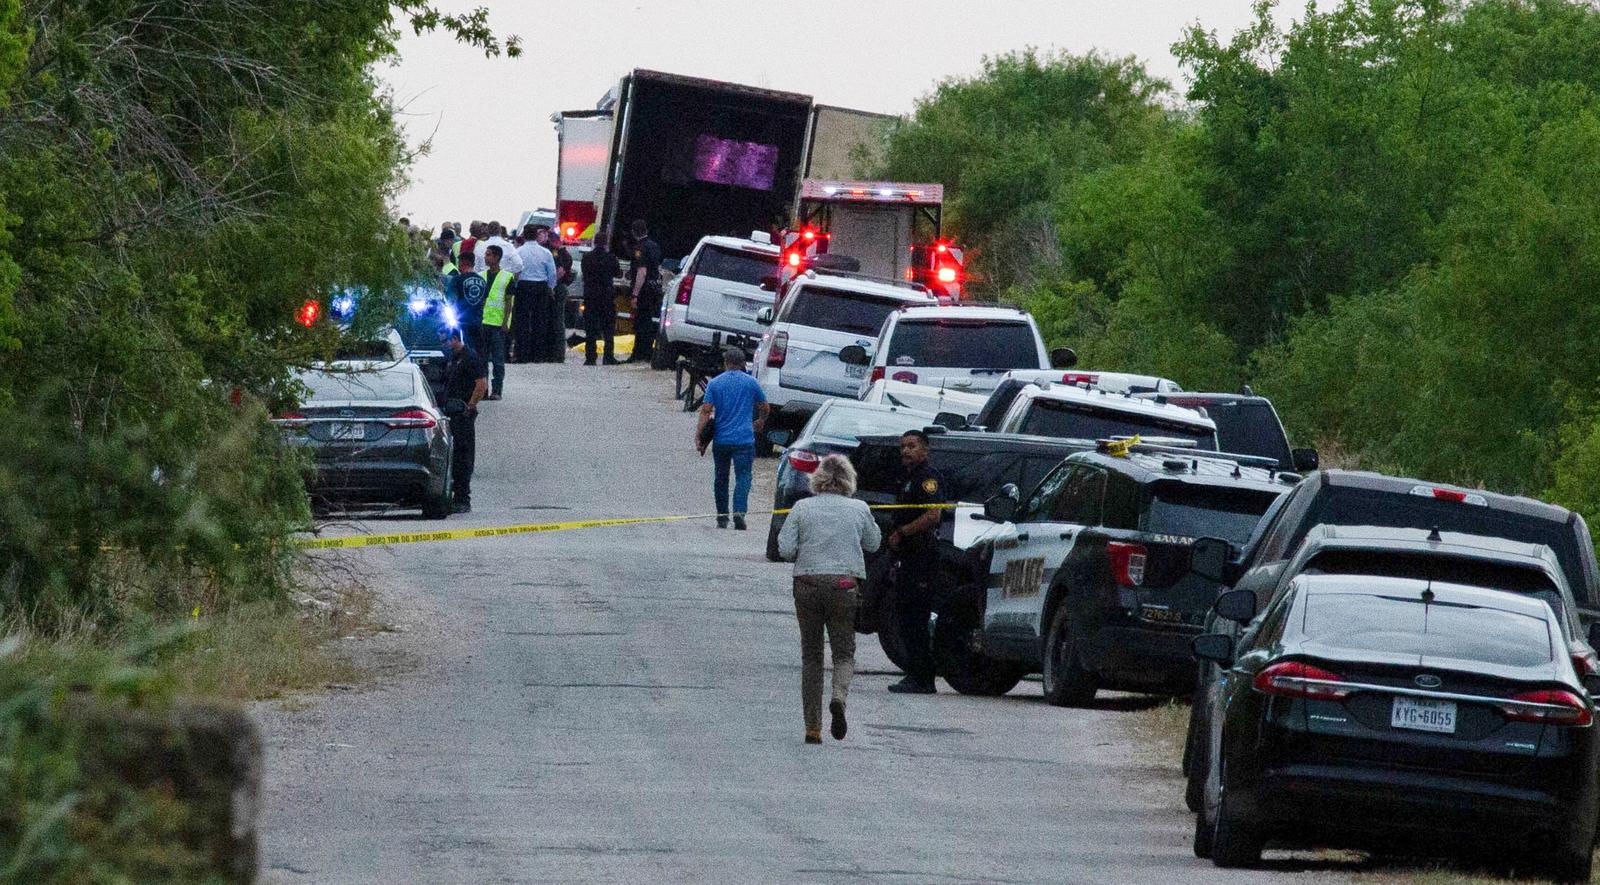 Law enforcement officers work at the scene where people were found dead inside a trailer truck in San Antonio, Texas, U.S. June 27, 2022. REUTERS/Kaylee Greenlee Beal Photo: KAYLEE GREENLEE BEAL/REUTERS